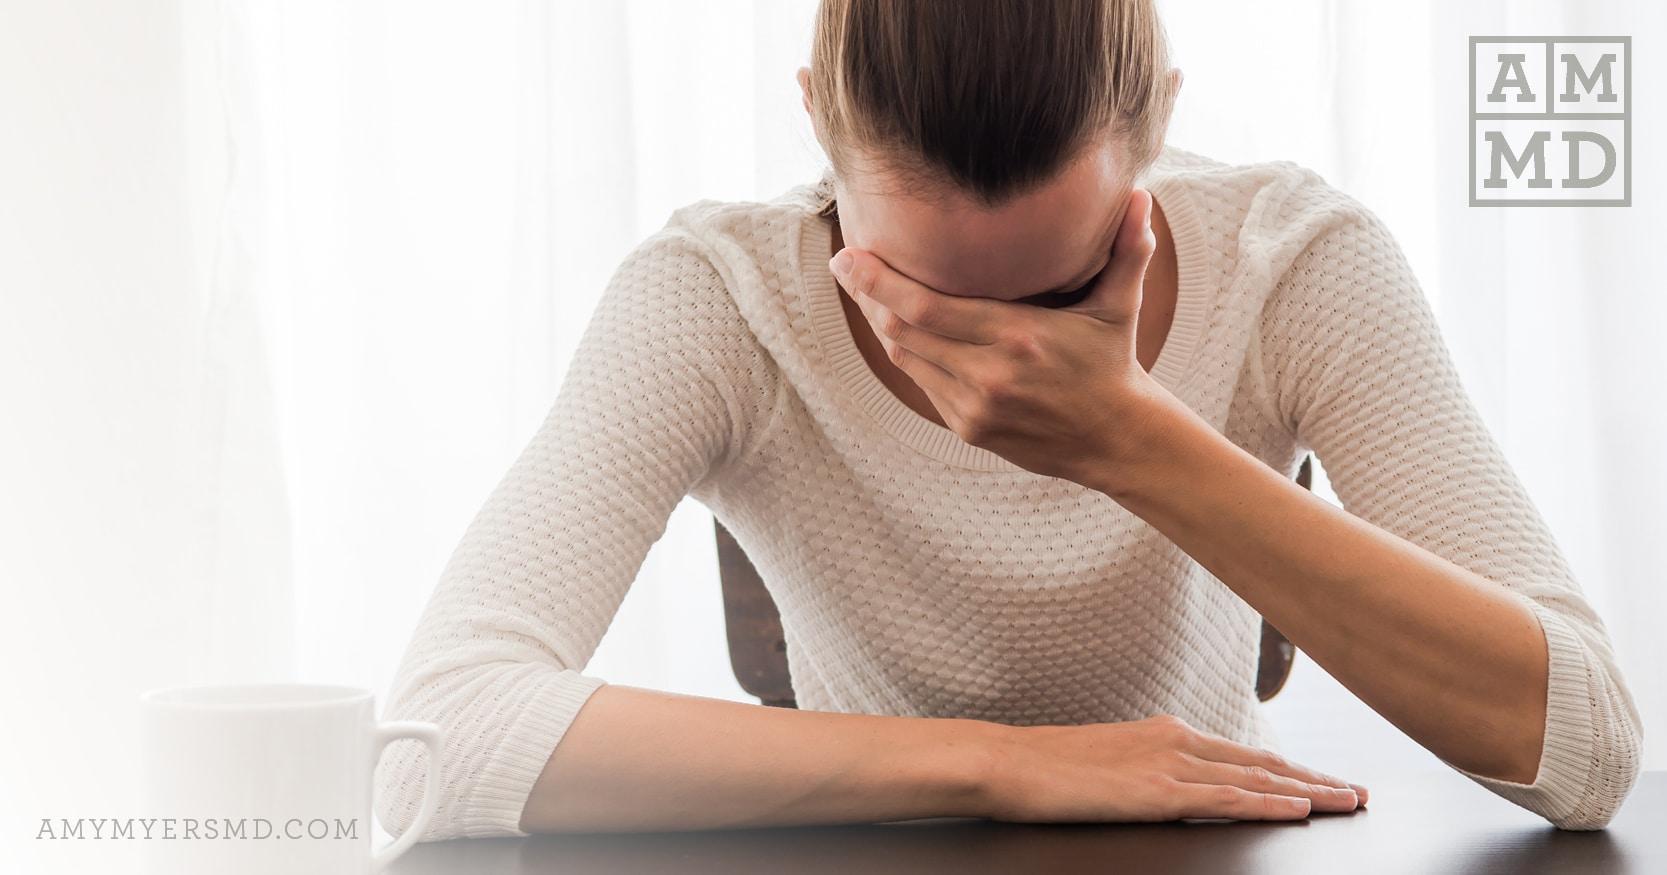 7 Health Problems That Can Cause Anxiety